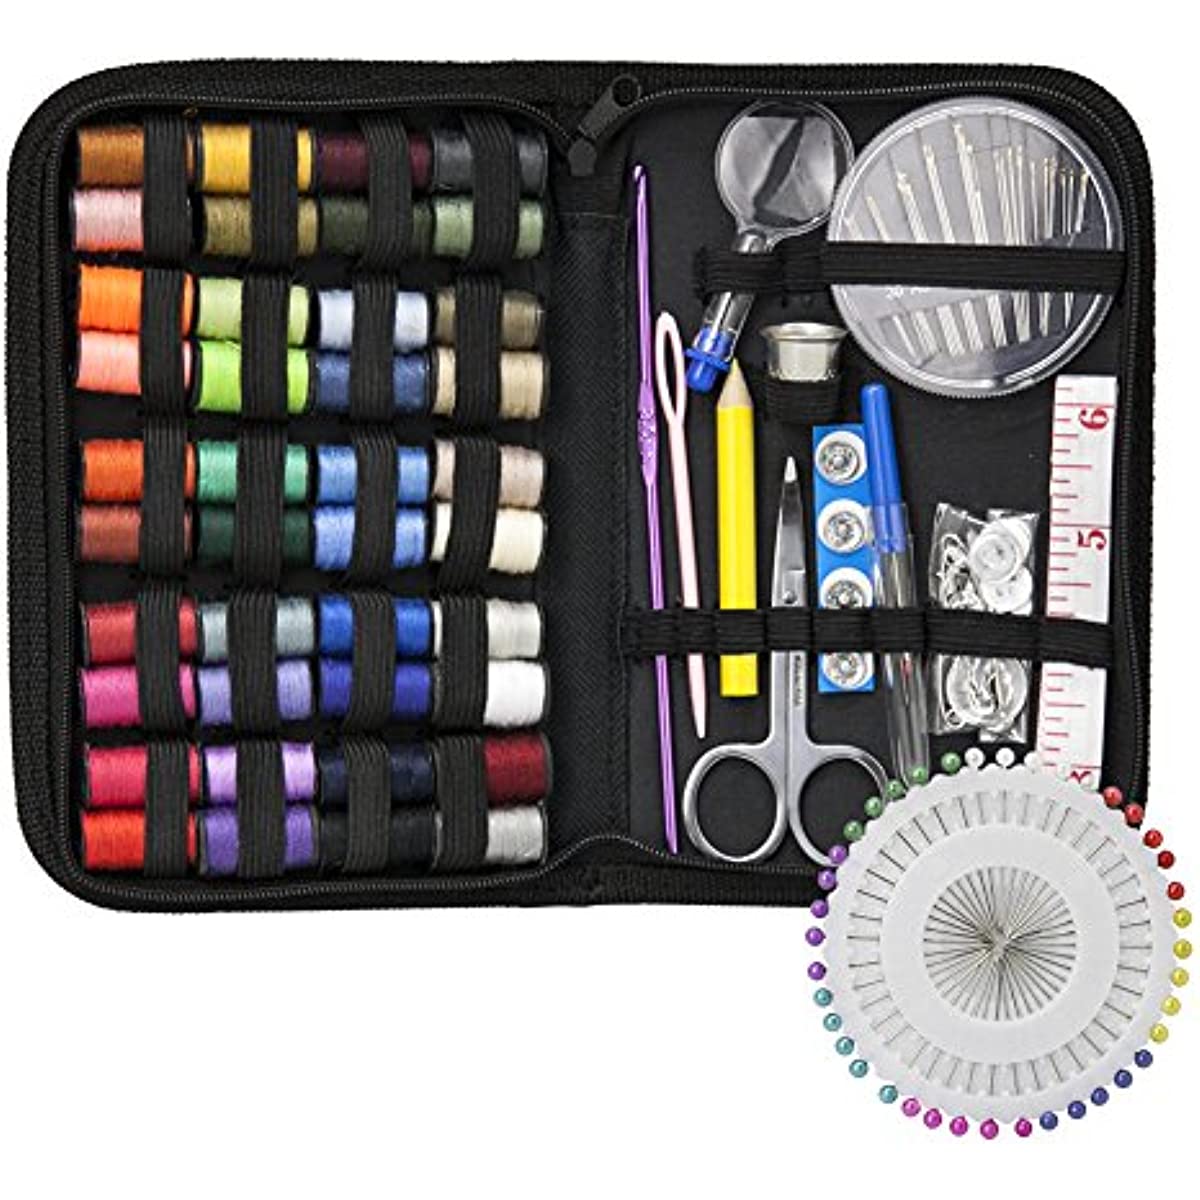 Sewing Kit - 98 PCs Premium Portable Needle and Thread Set for Beginners